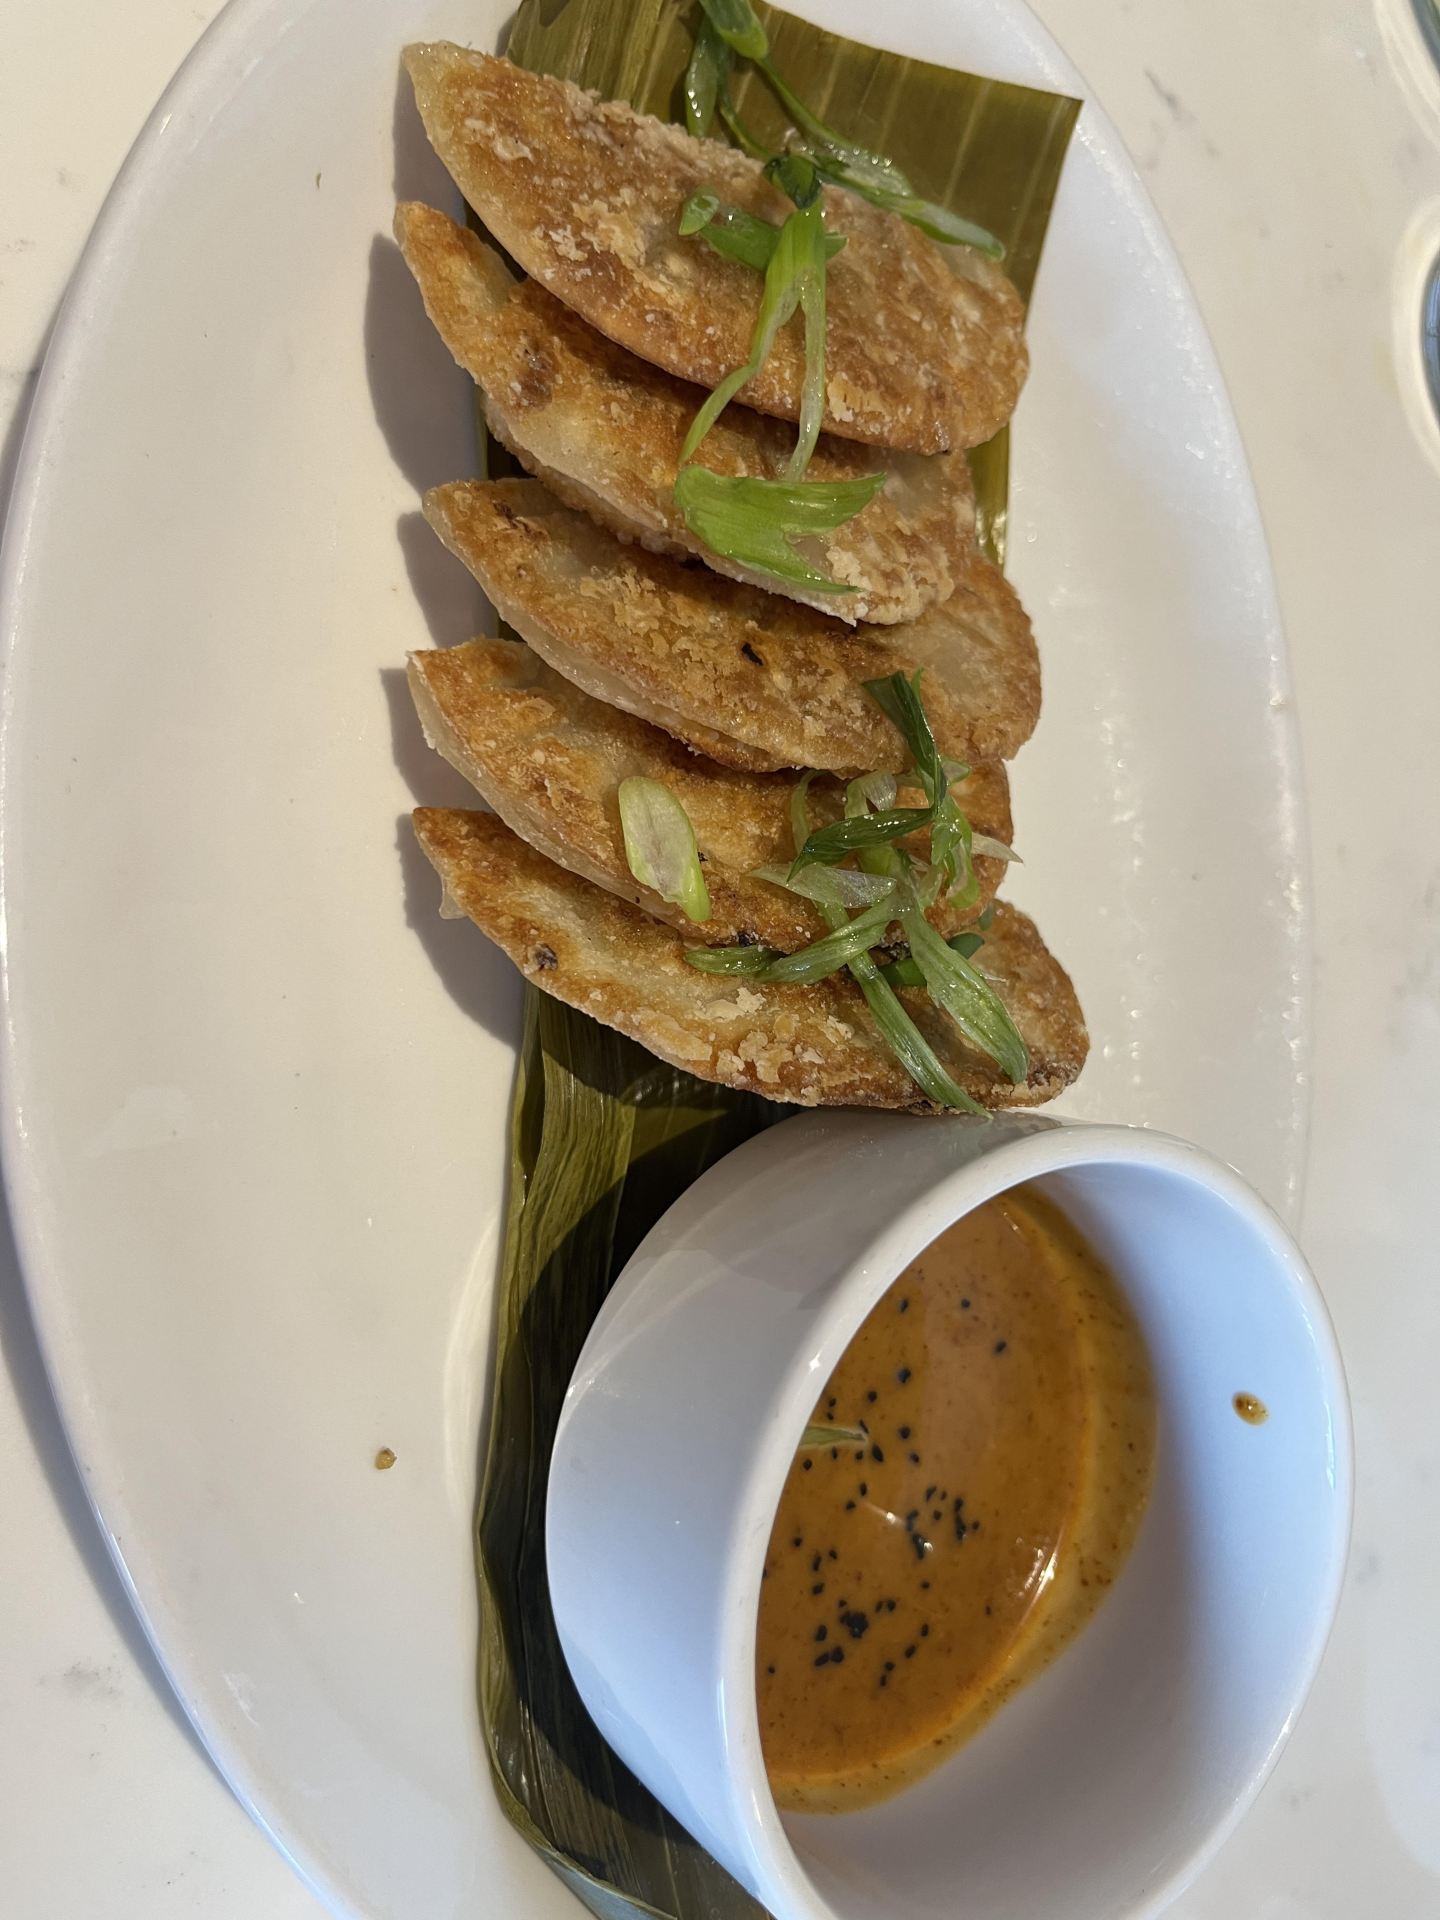 Edamame dumplings served with Thai almond dipping sauce. Credit: Kate Shields | Campus Editor